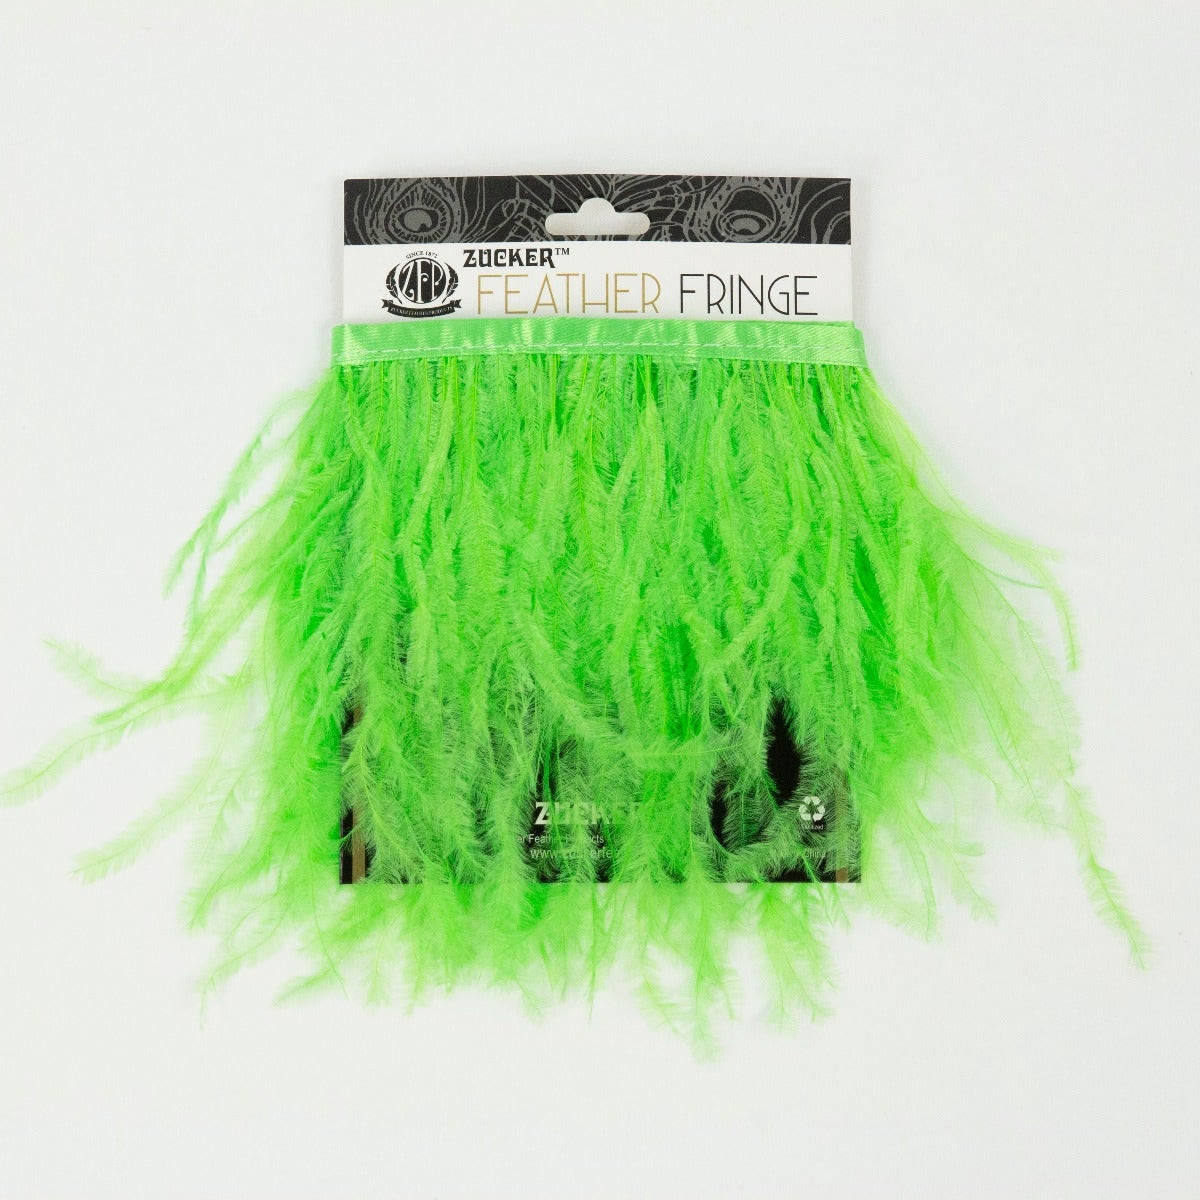 One-Ply Ostrich Feather Fringe - 1 Yard - Lime Green